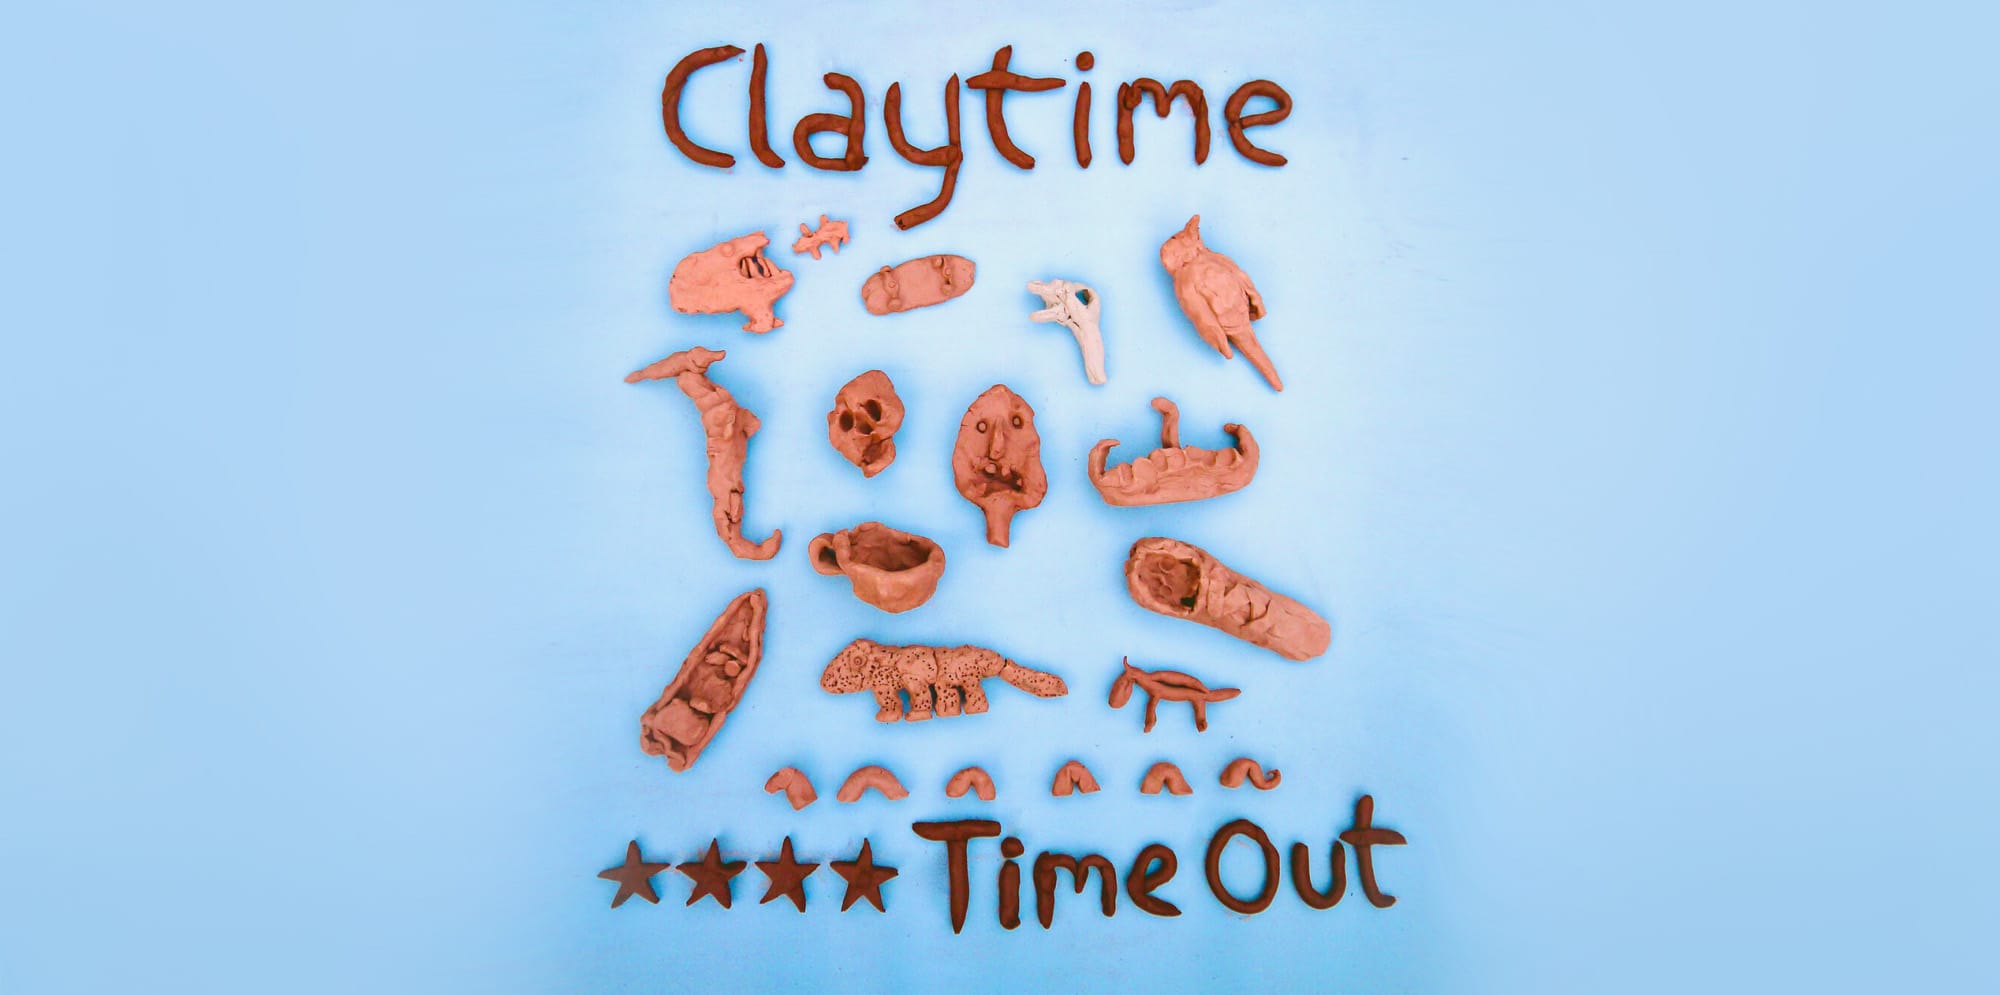 The word 'Claytime' is spelt out in brown clay against a sky blue background. In the centre of the image, several funky clay artefacts are featured including a dinosaur, a boat and a teacup.